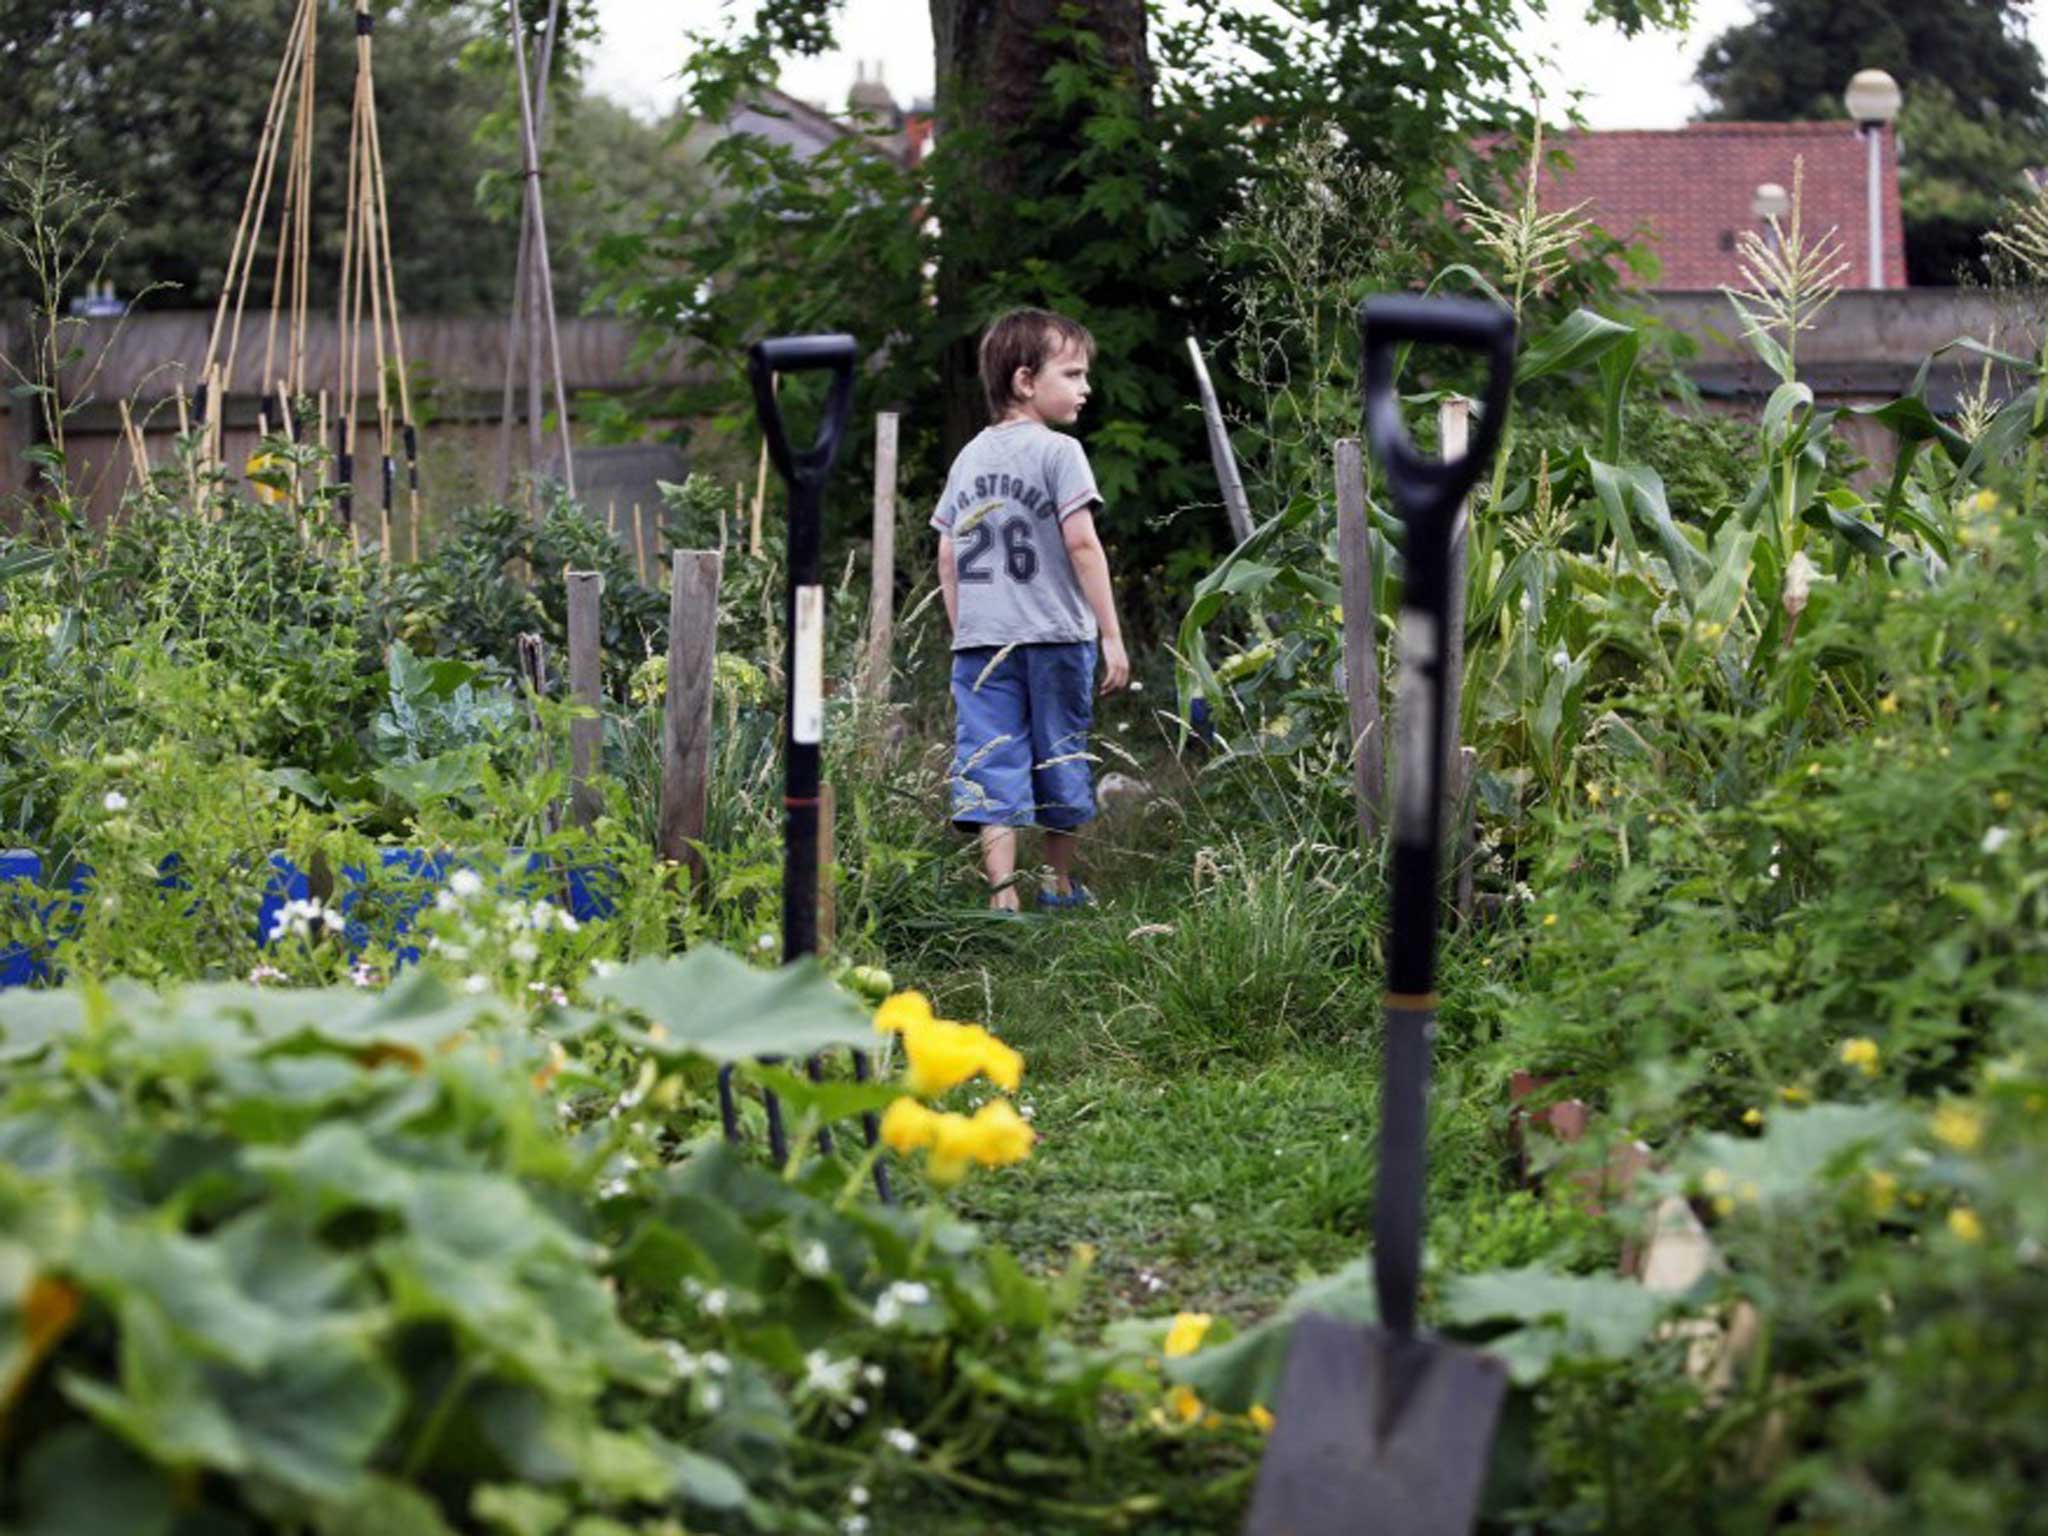 Gardening therapy has huge potential for cost savings in the NHS and can speed up recovery time